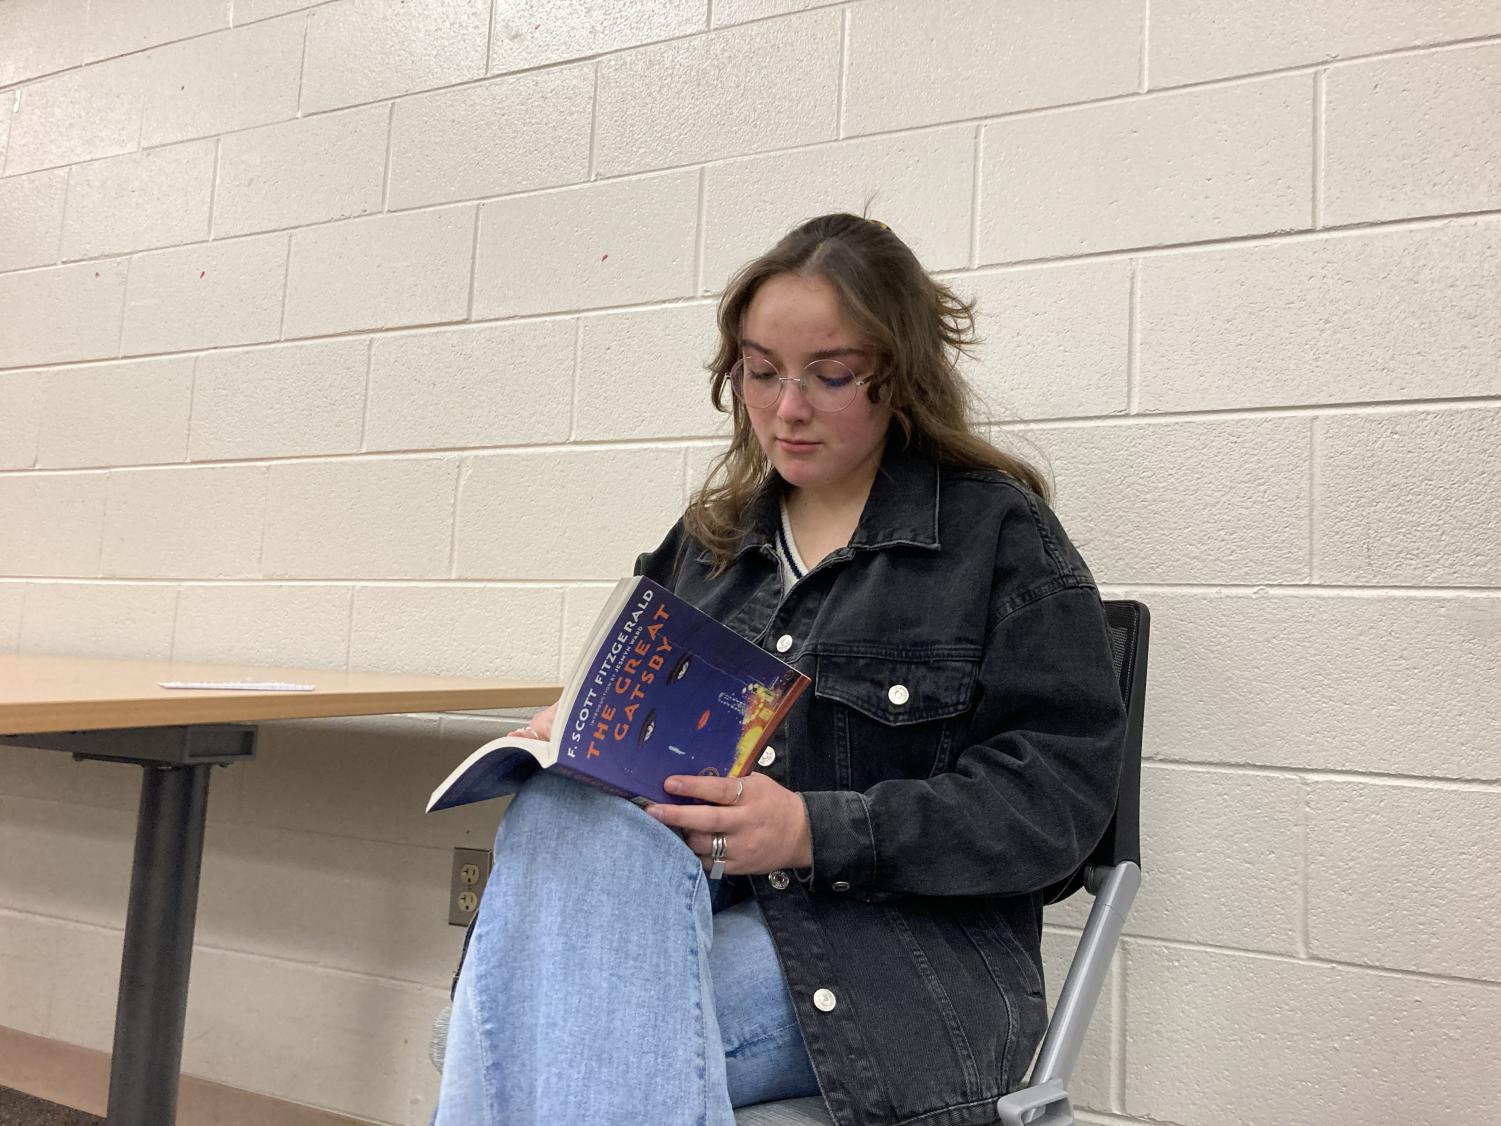 Sofia Garnica reads The Great Gatsby for her IB Literature class.